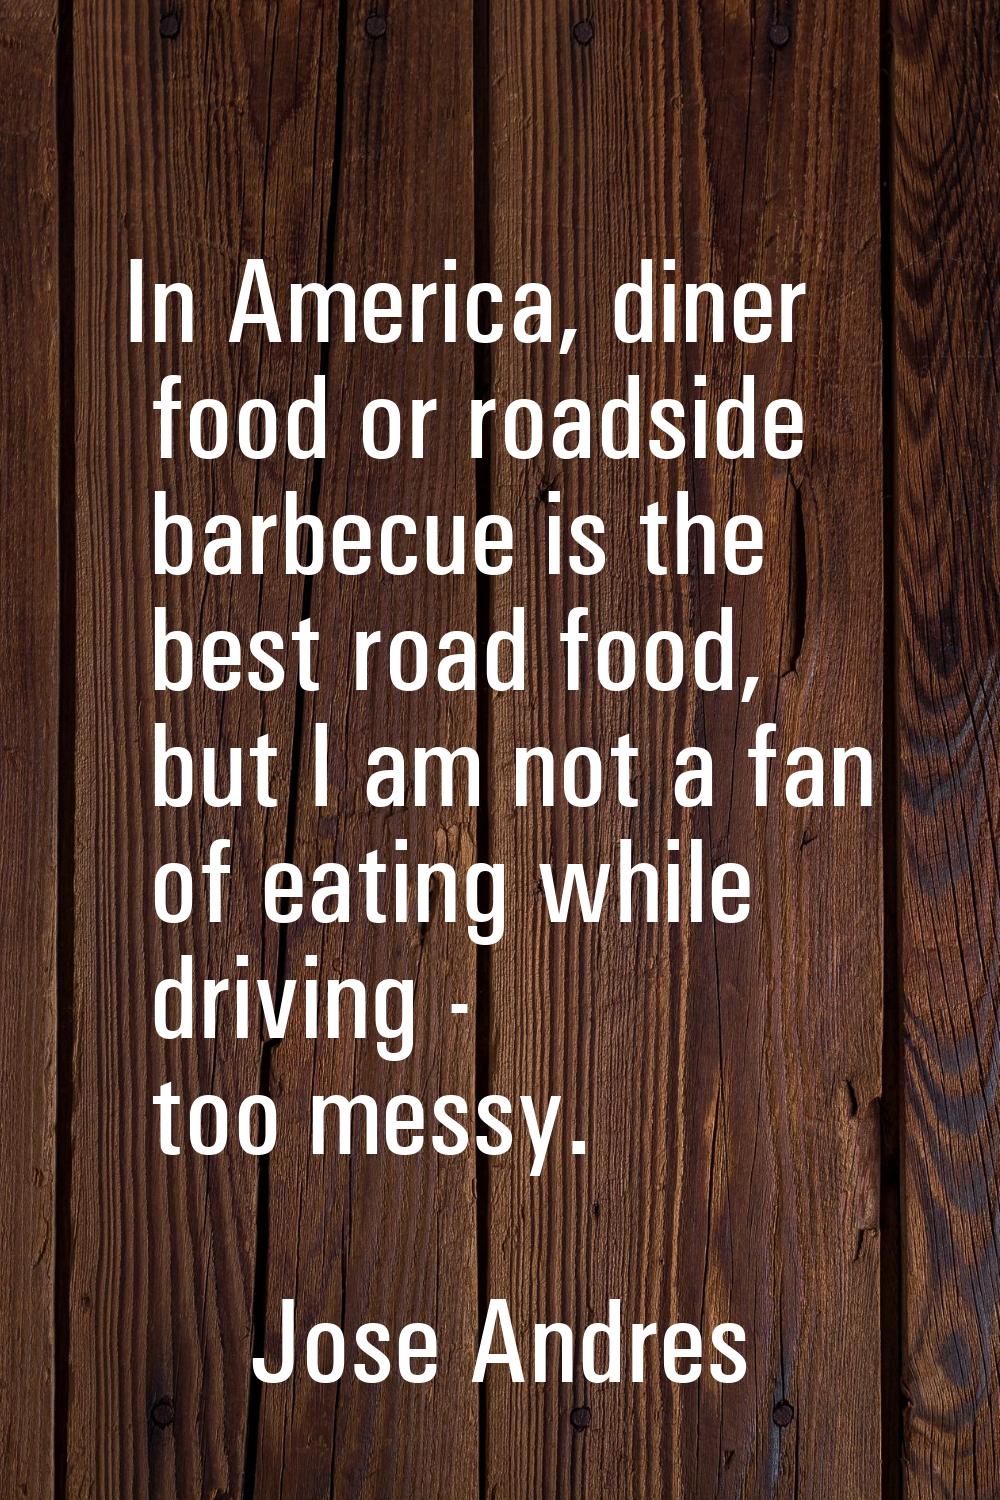 In America, diner food or roadside barbecue is the best road food, but I am not a fan of eating whi